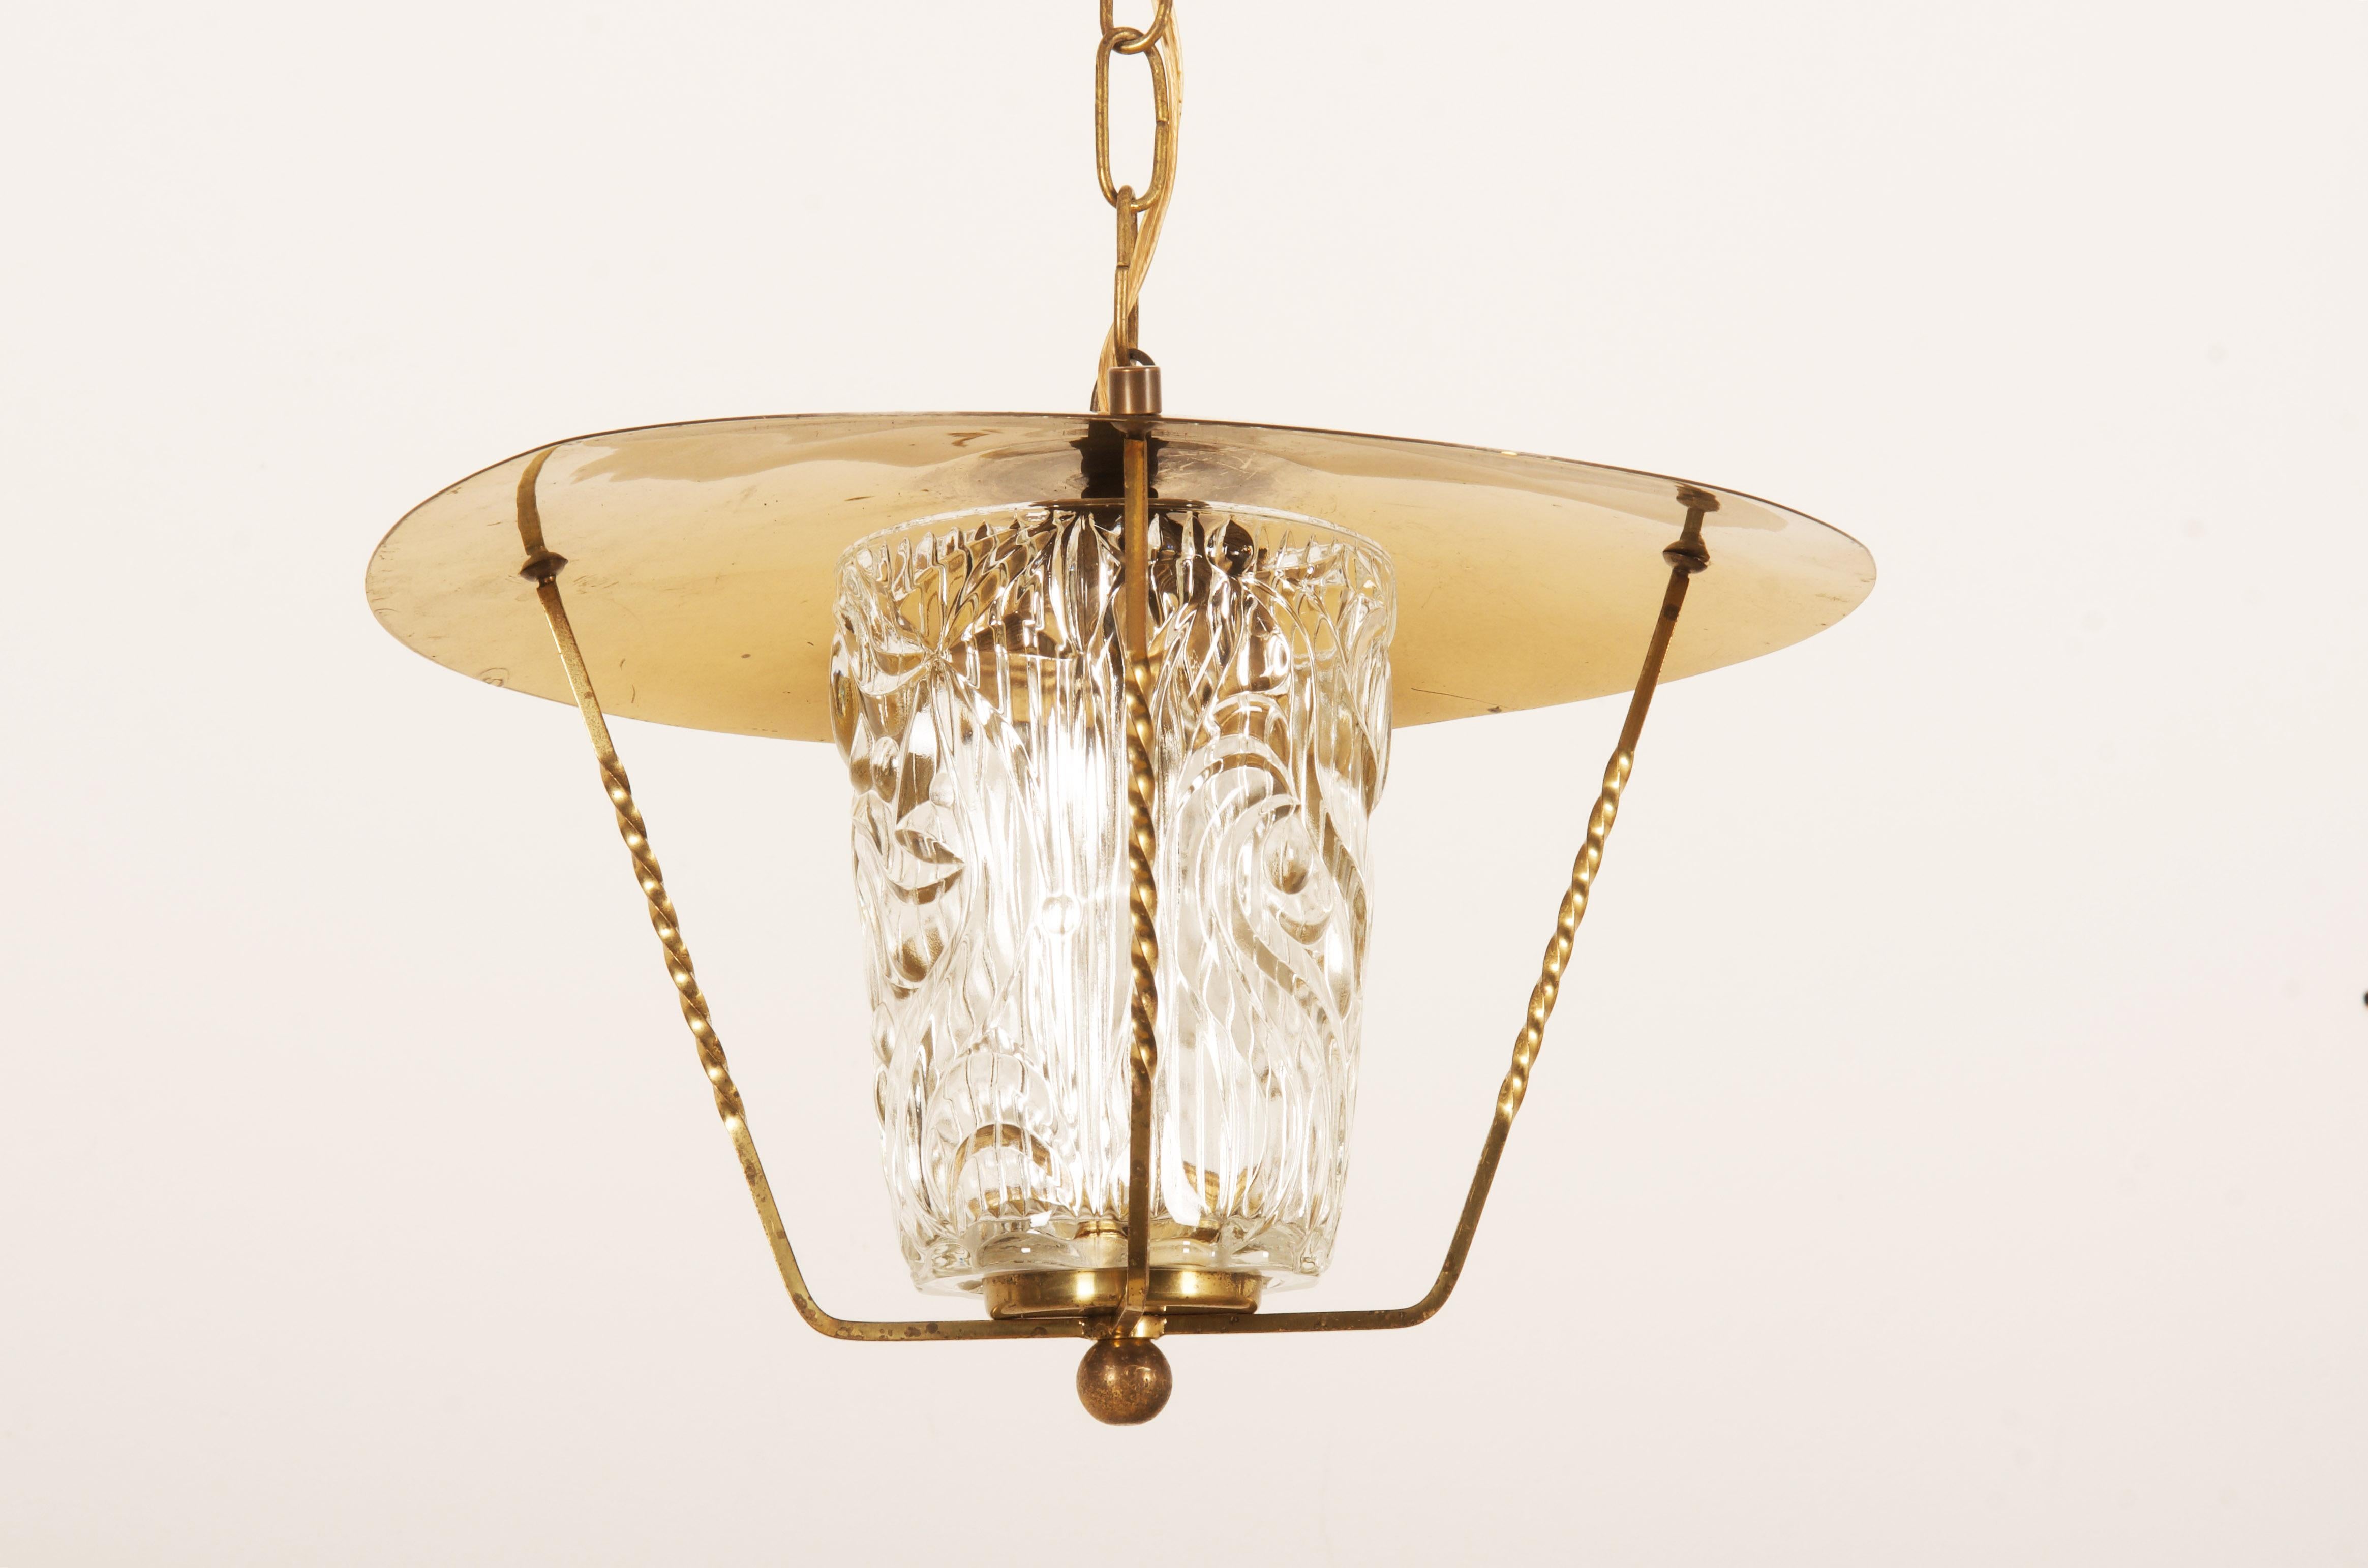 Midcentury Brass Pendant Lamp With Structured Glass Shade  In Good Condition For Sale In Vienna, AT